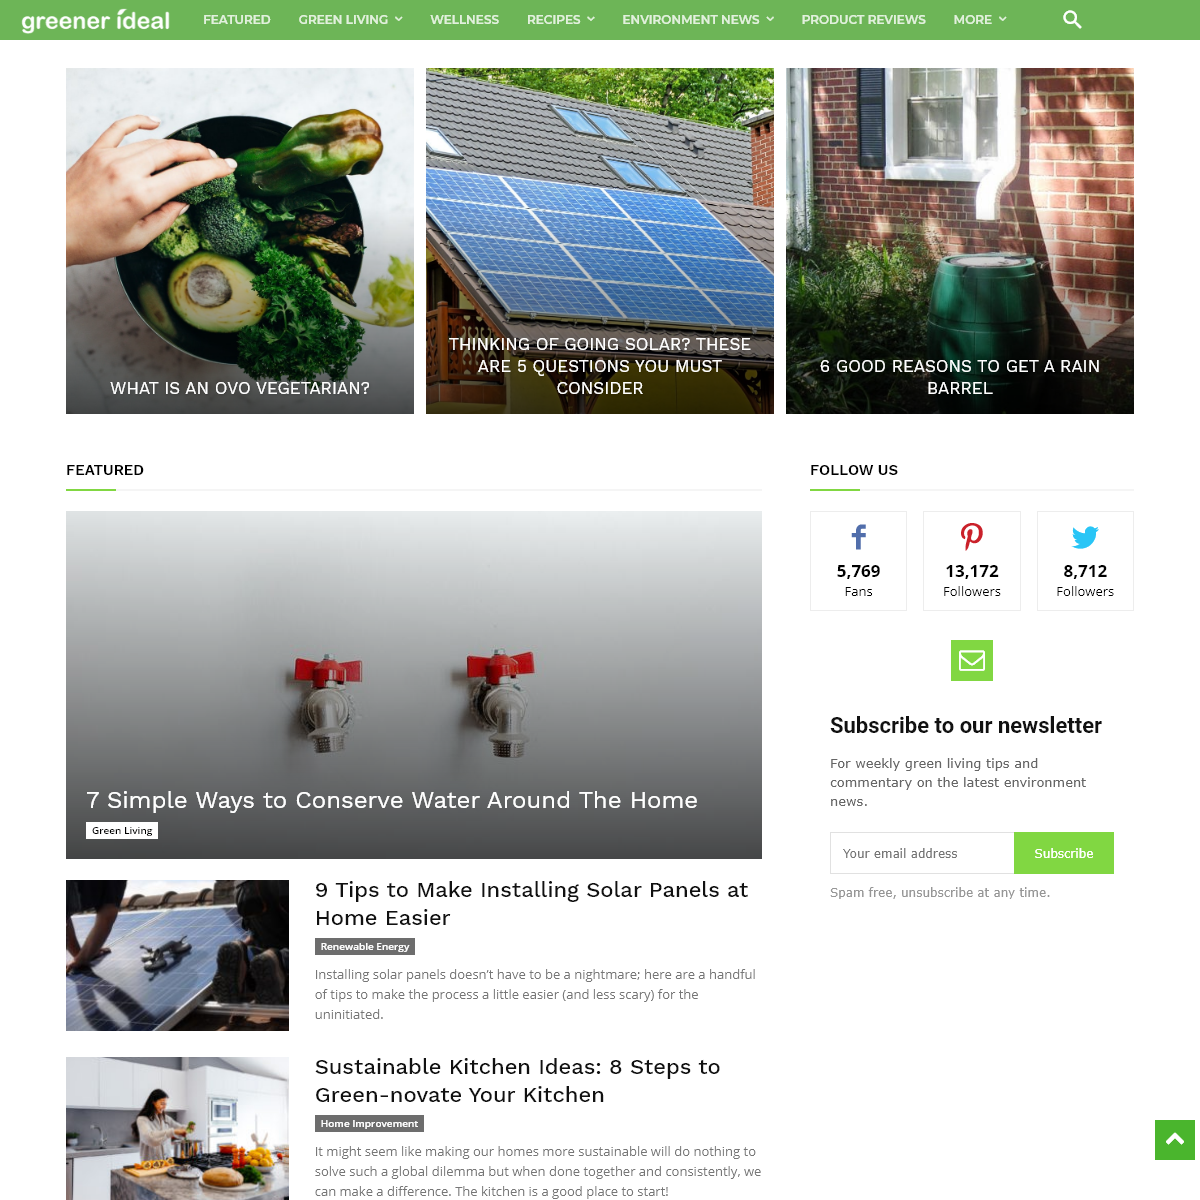 A complete backup of greenerideal.com